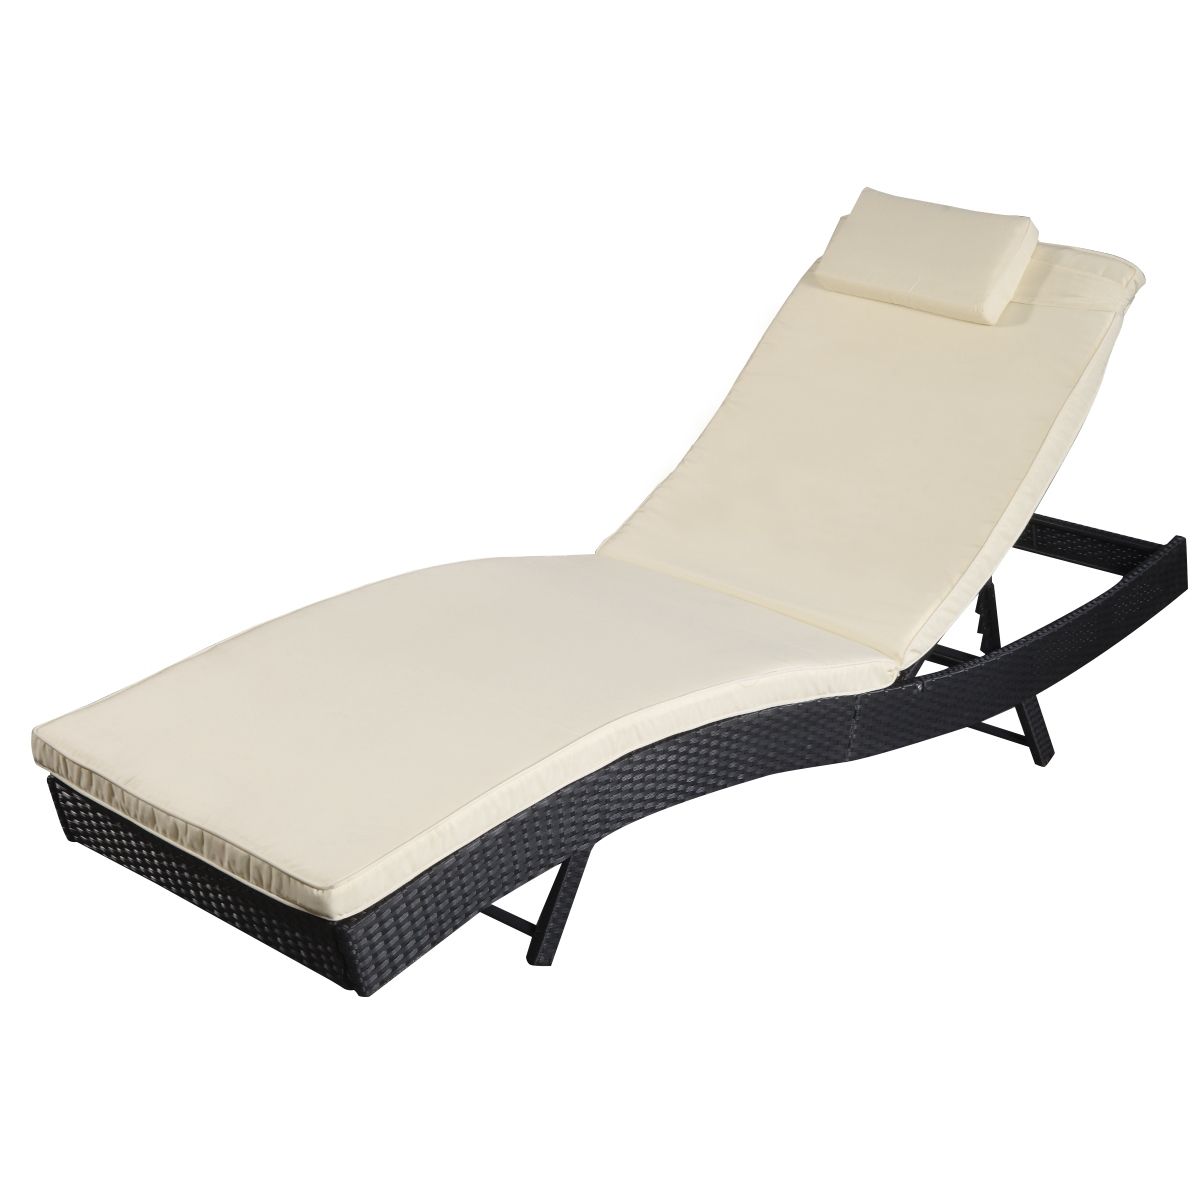 Preferred Costway Adjustable Pool Chaise Lounge Chair Outdoor Patio With Adjustable Pool Chaise Lounge Chair Recliners (View 3 of 15)